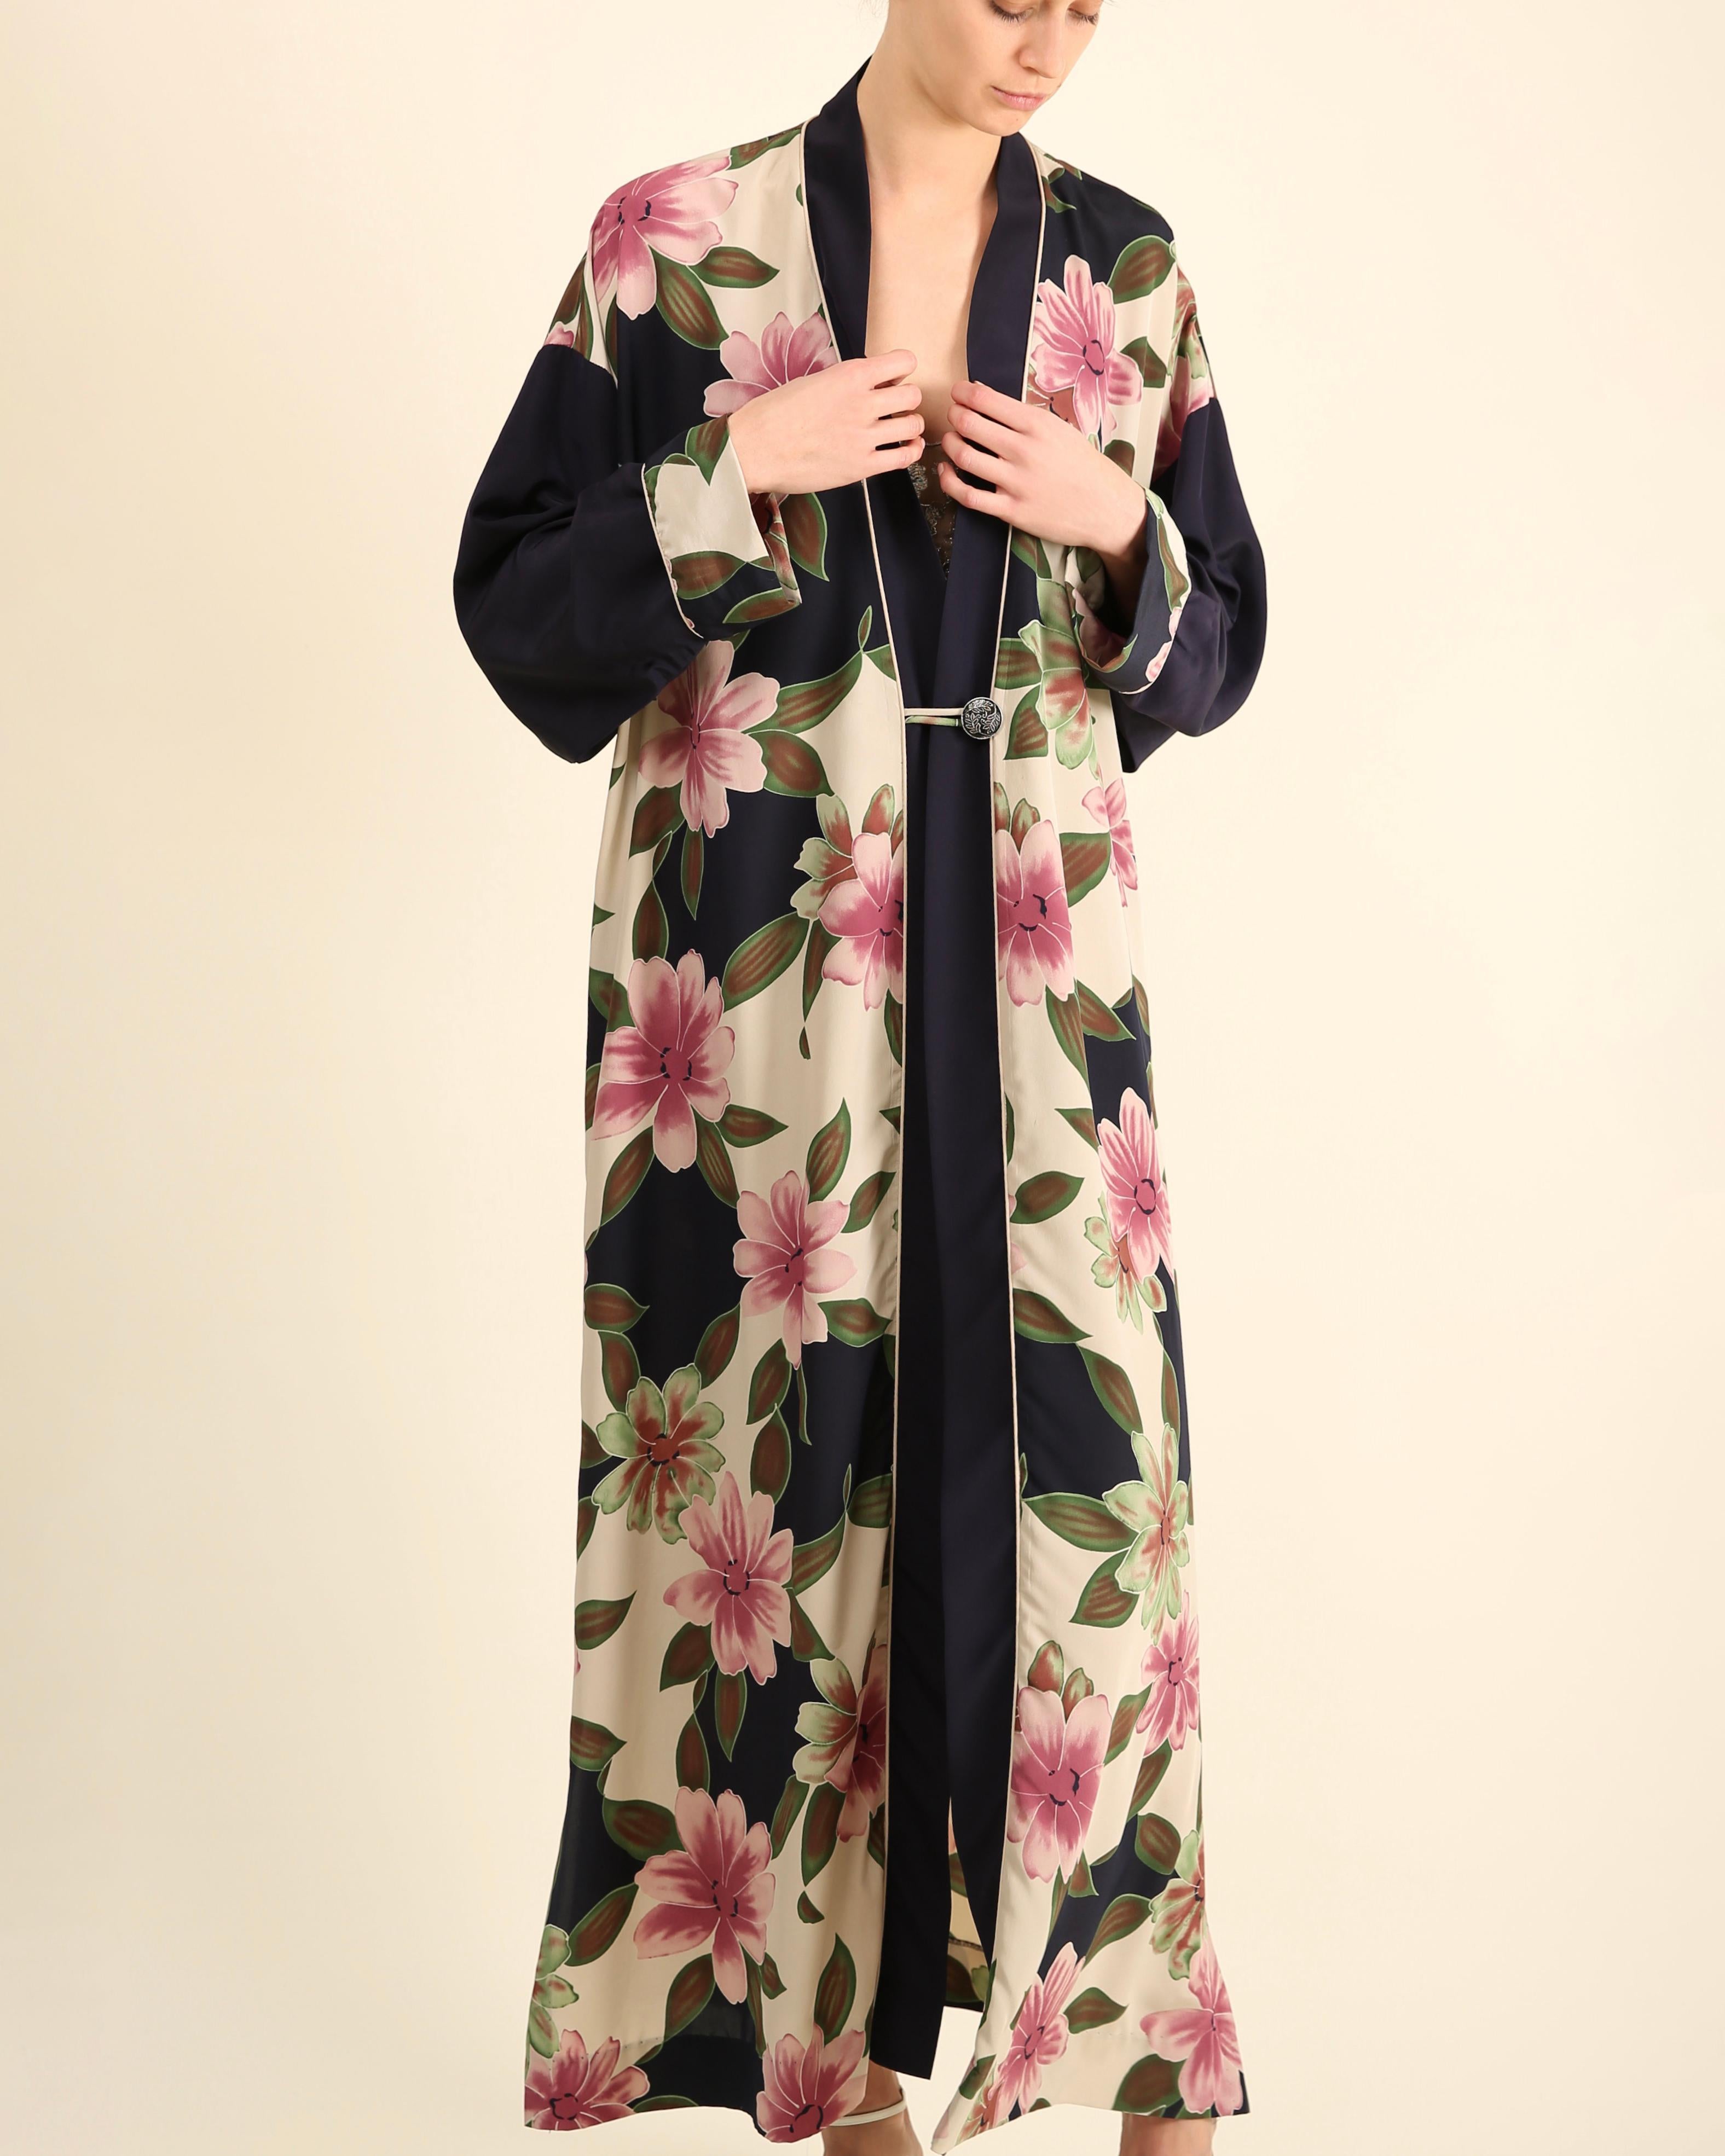 Christian Dior vintage navy pink floral oversized dress coat night gown robe For Sale 5